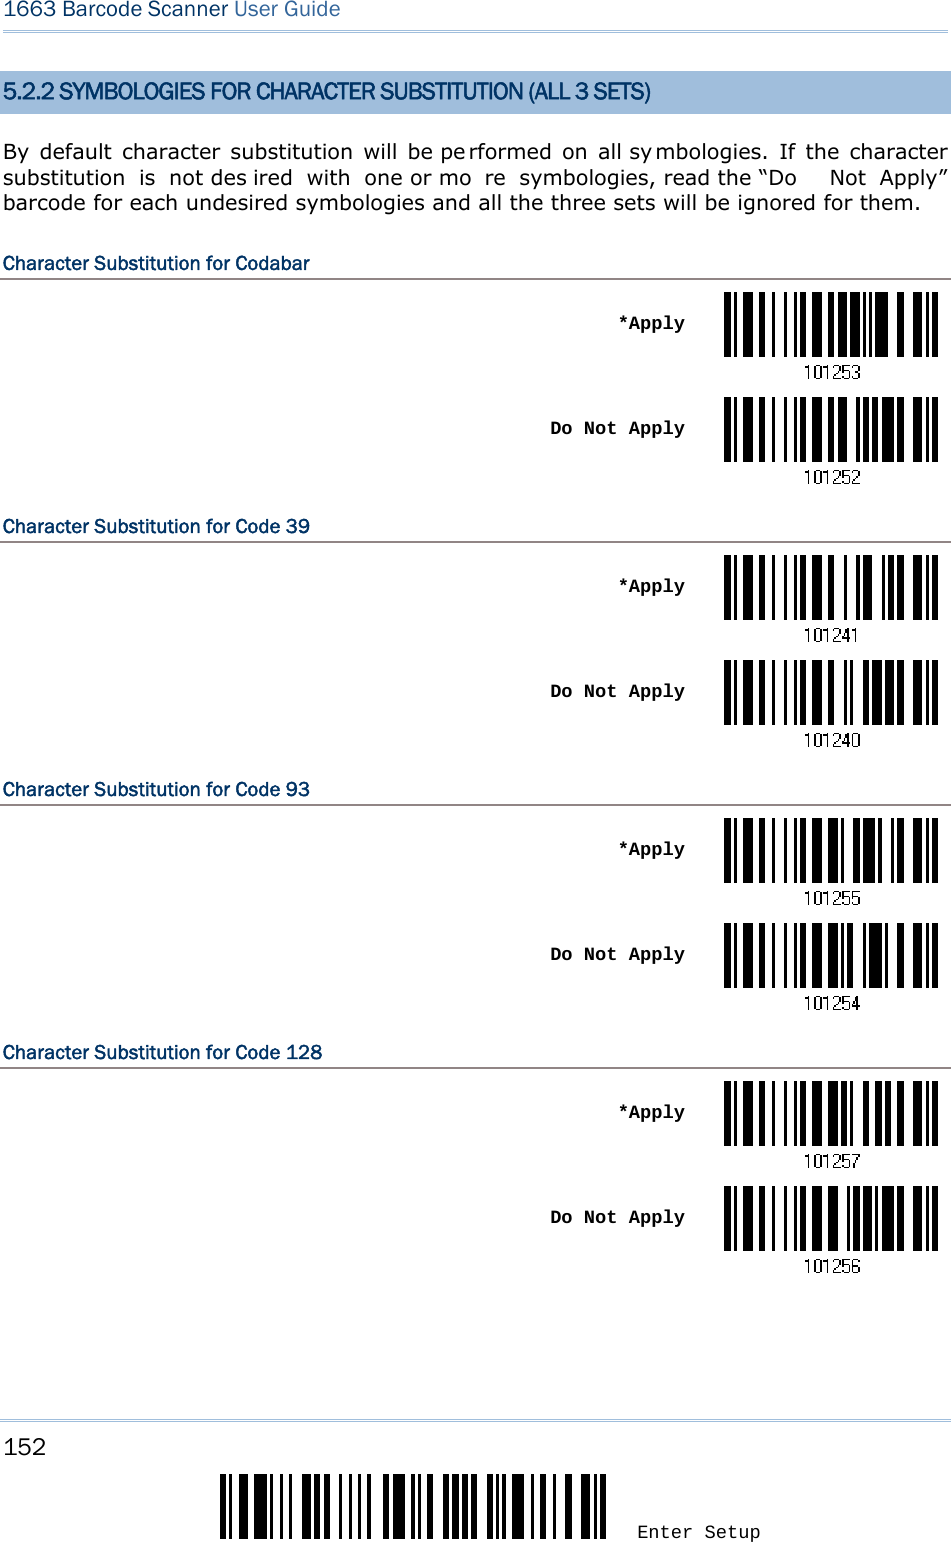 152 Enter Setup 1663 Barcode Scanner User Guide  5.2.2 SYMBOLOGIES FOR CHARACTER SUBSTITUTION (ALL 3 SETS) By default character substitution will be pe rformed on all sy mbologies. If the character substitution is not des ired with one or mo re symbologies, read the “Do  Not Apply” barcode for each undesired symbologies and all the three sets will be ignored for them. Character Substitution for Codabar  *Apply Do Not ApplyCharacter Substitution for Code 39  *Apply Do Not ApplyCharacter Substitution for Code 93  *Apply Do Not ApplyCharacter Substitution for Code 128  *Apply Do Not Apply   